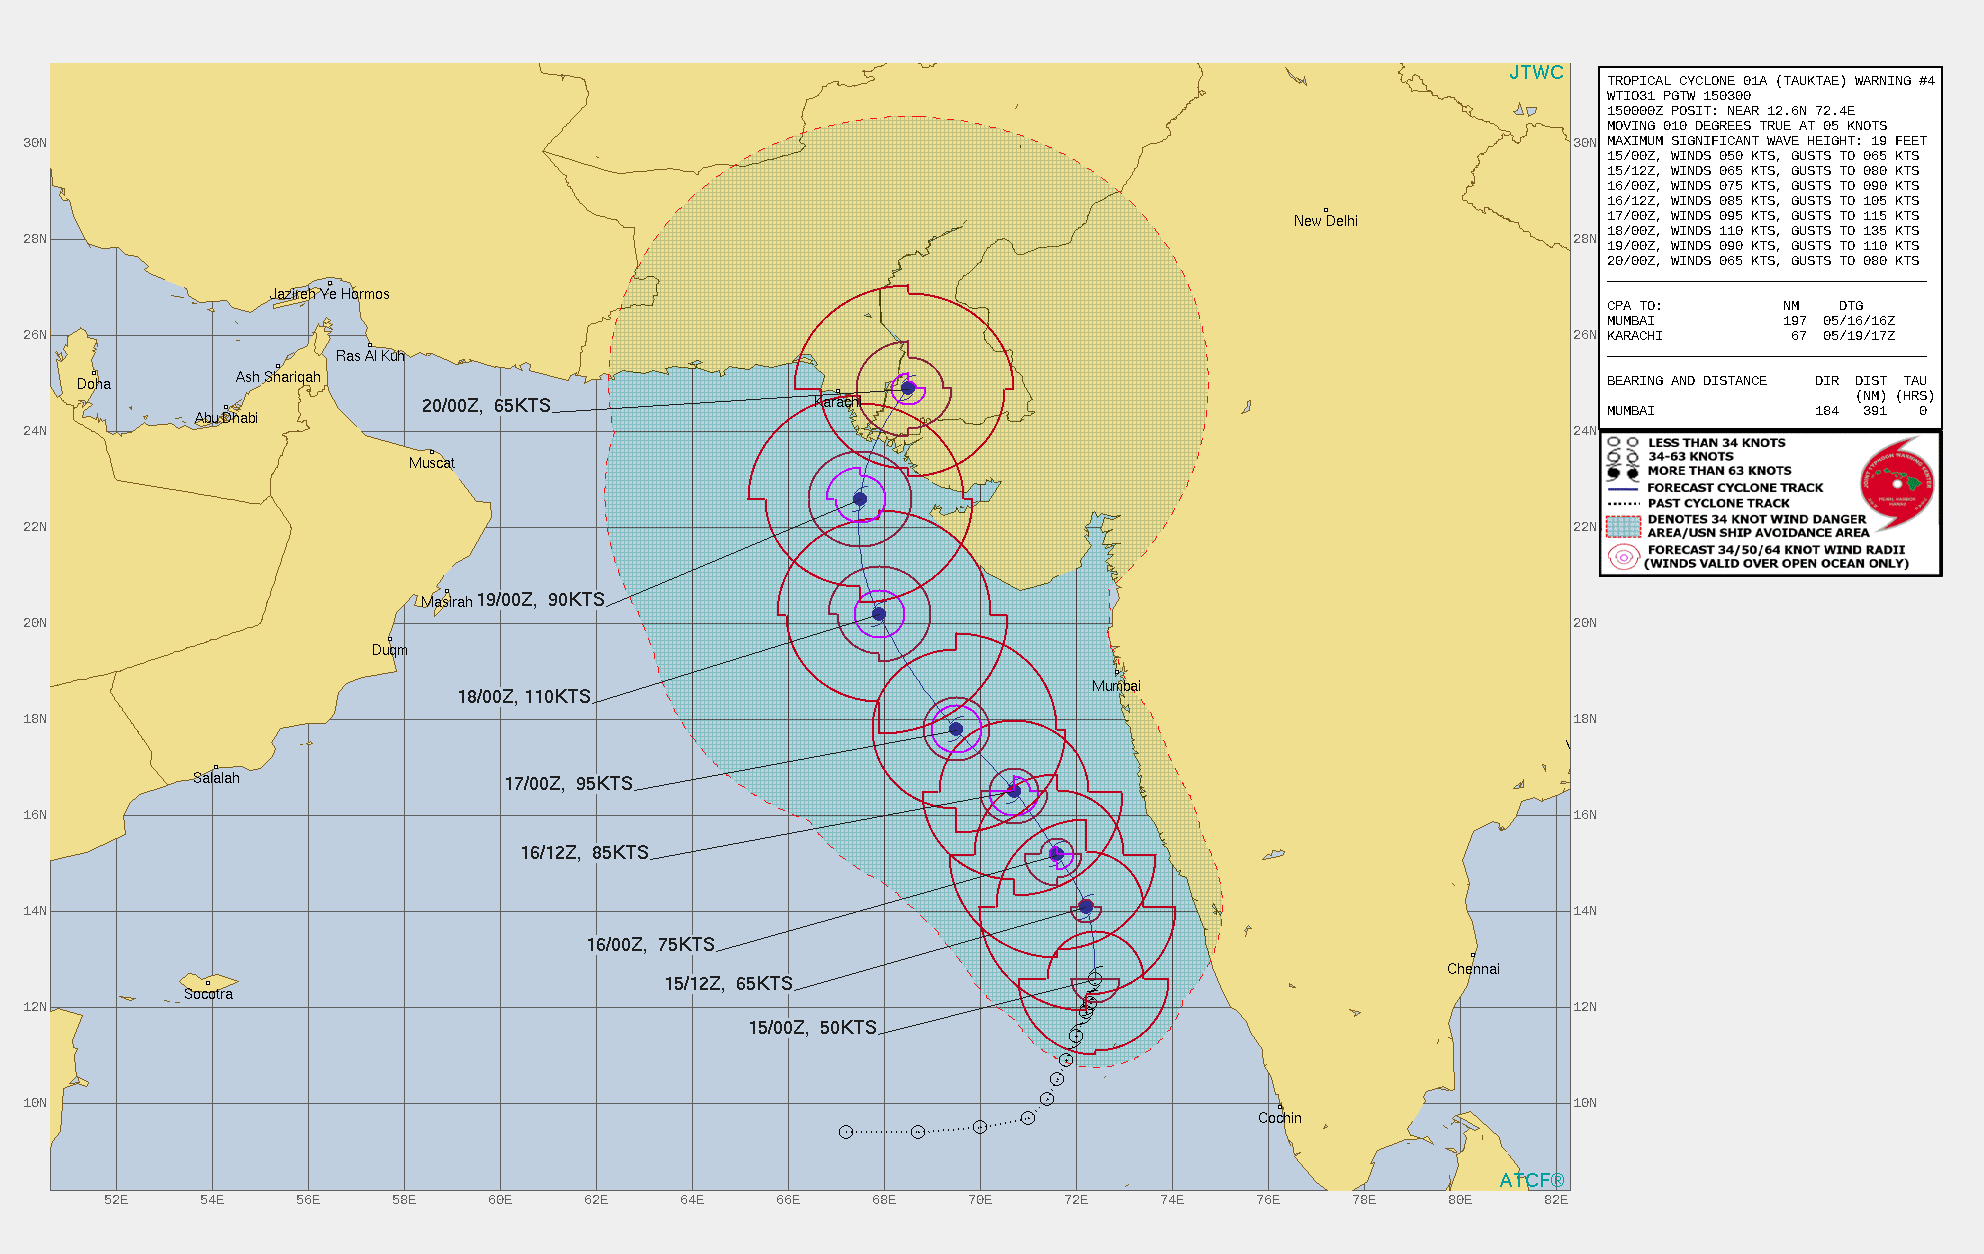 TC 01A(TAUKTAE). WARNING 4 ISSUED AT 15/03UTC.UPPER-LEVEL ANALYSIS INDICATES VERY FAVORABLE ENVIRONMENTAL  CONDITIONS WITH NEARLY RADIAL OUTFLOW, LOW VERTICAL WIND SHEAR AND  WARM (31C) SST VALUES. TC 01A IS TRACKING POLEWARD ALONG THE WESTERN  PERIPHERY OF A DEEP-LAYERED SUBTROPICAL RIDGE (STR) POSITIONED TO  THE EAST. TC 01A IS FORECAST TO GRADUALLY TURN NORTH-NORTHWESTWARD  THROUGH 72H BEFORE RECURVING NORTH-NORTHEASTWARD AFTER 96H. DUE TO THE EXCELLENT ENVIRONMENTAL CONDITIONS, TC 01A IS EXPECTED TO  INTENSIFY RAPIDLY AFTER 24H WITH A PEAK OF 110 KNOTS/US CAT 3 BY 72H.  STEADY WEAKENING WILL OCCUR AS THE SYSTEM APPROACHES THE  PAKISTAN/INDIA BORDER WITH RAPID WEAKENING AFTER THE SYSTEM MAKES  LANDFALL.